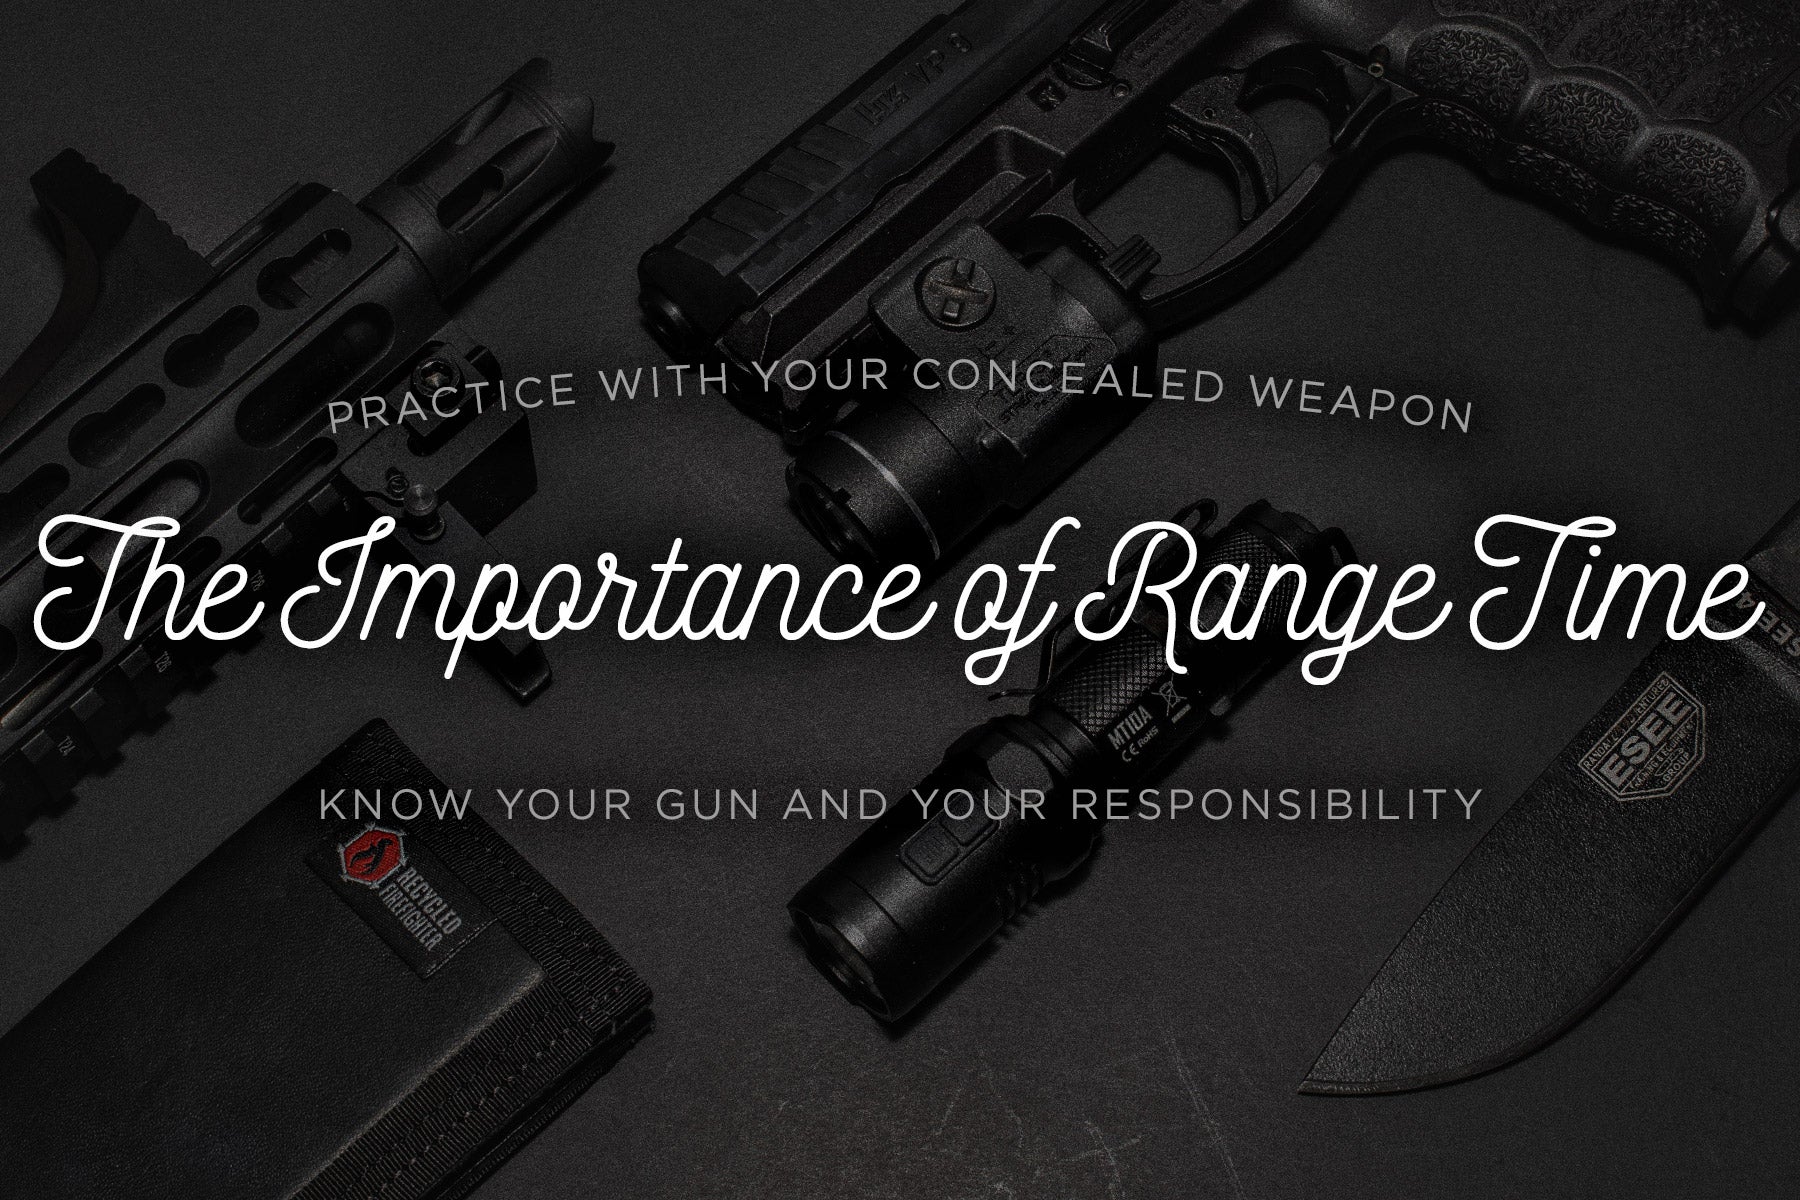 Practice with your concealed carry weapon